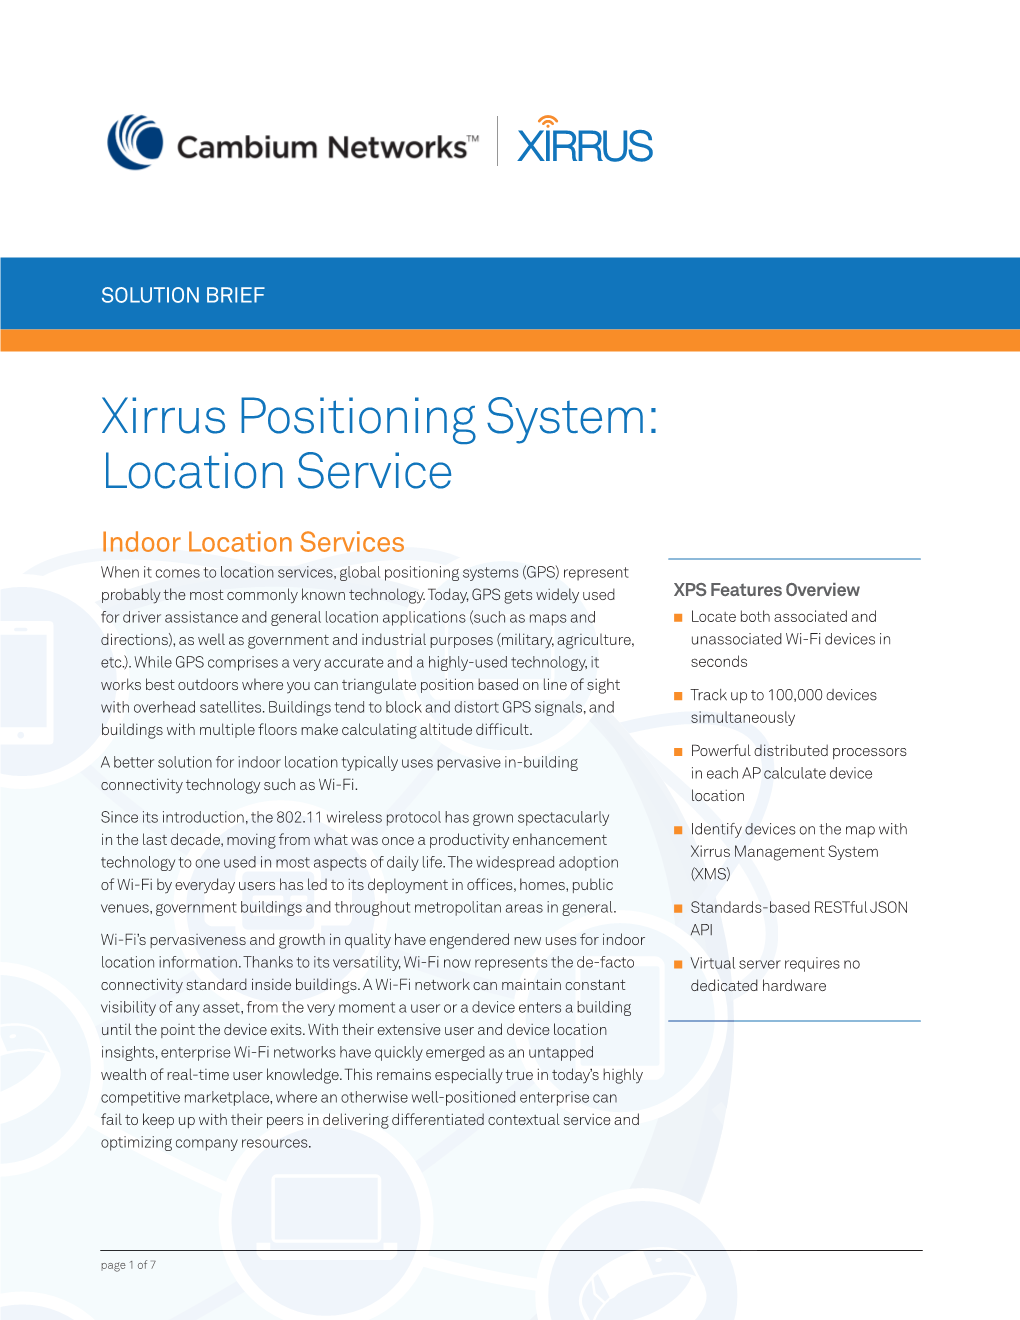 Xirrus Positioning System: Location Service